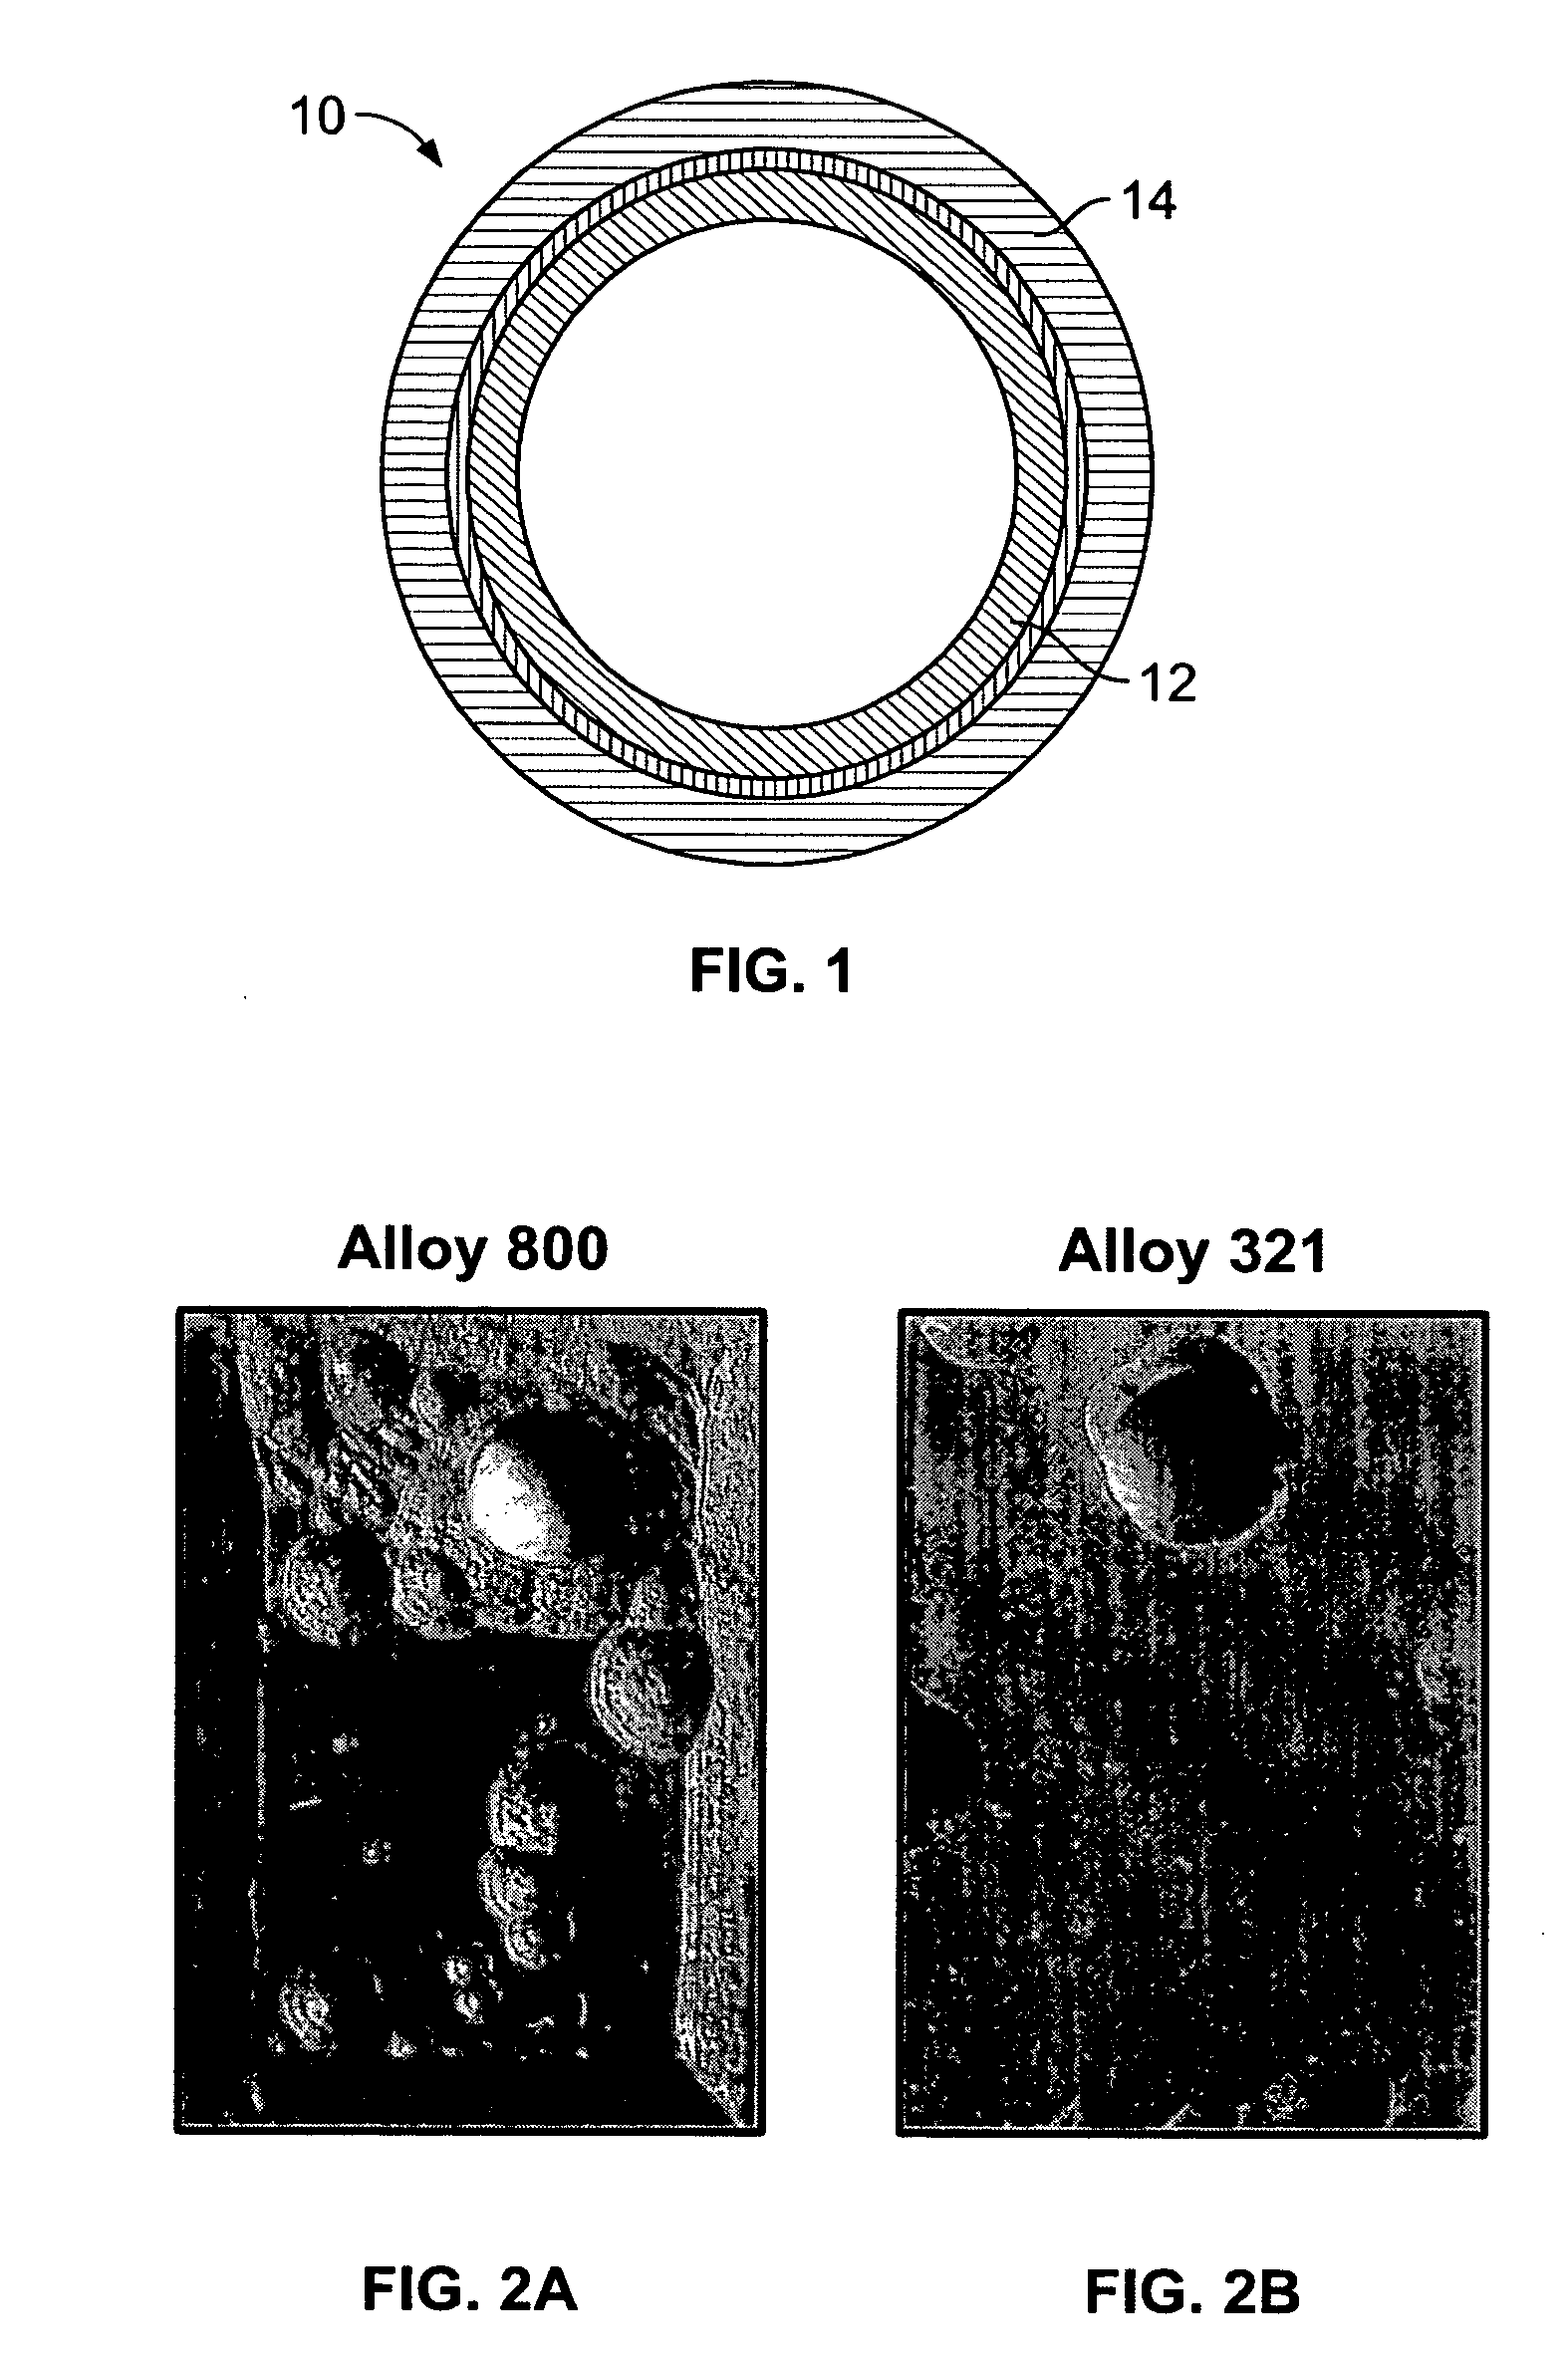 Nickel based alloys to prevent metal dusting degradation